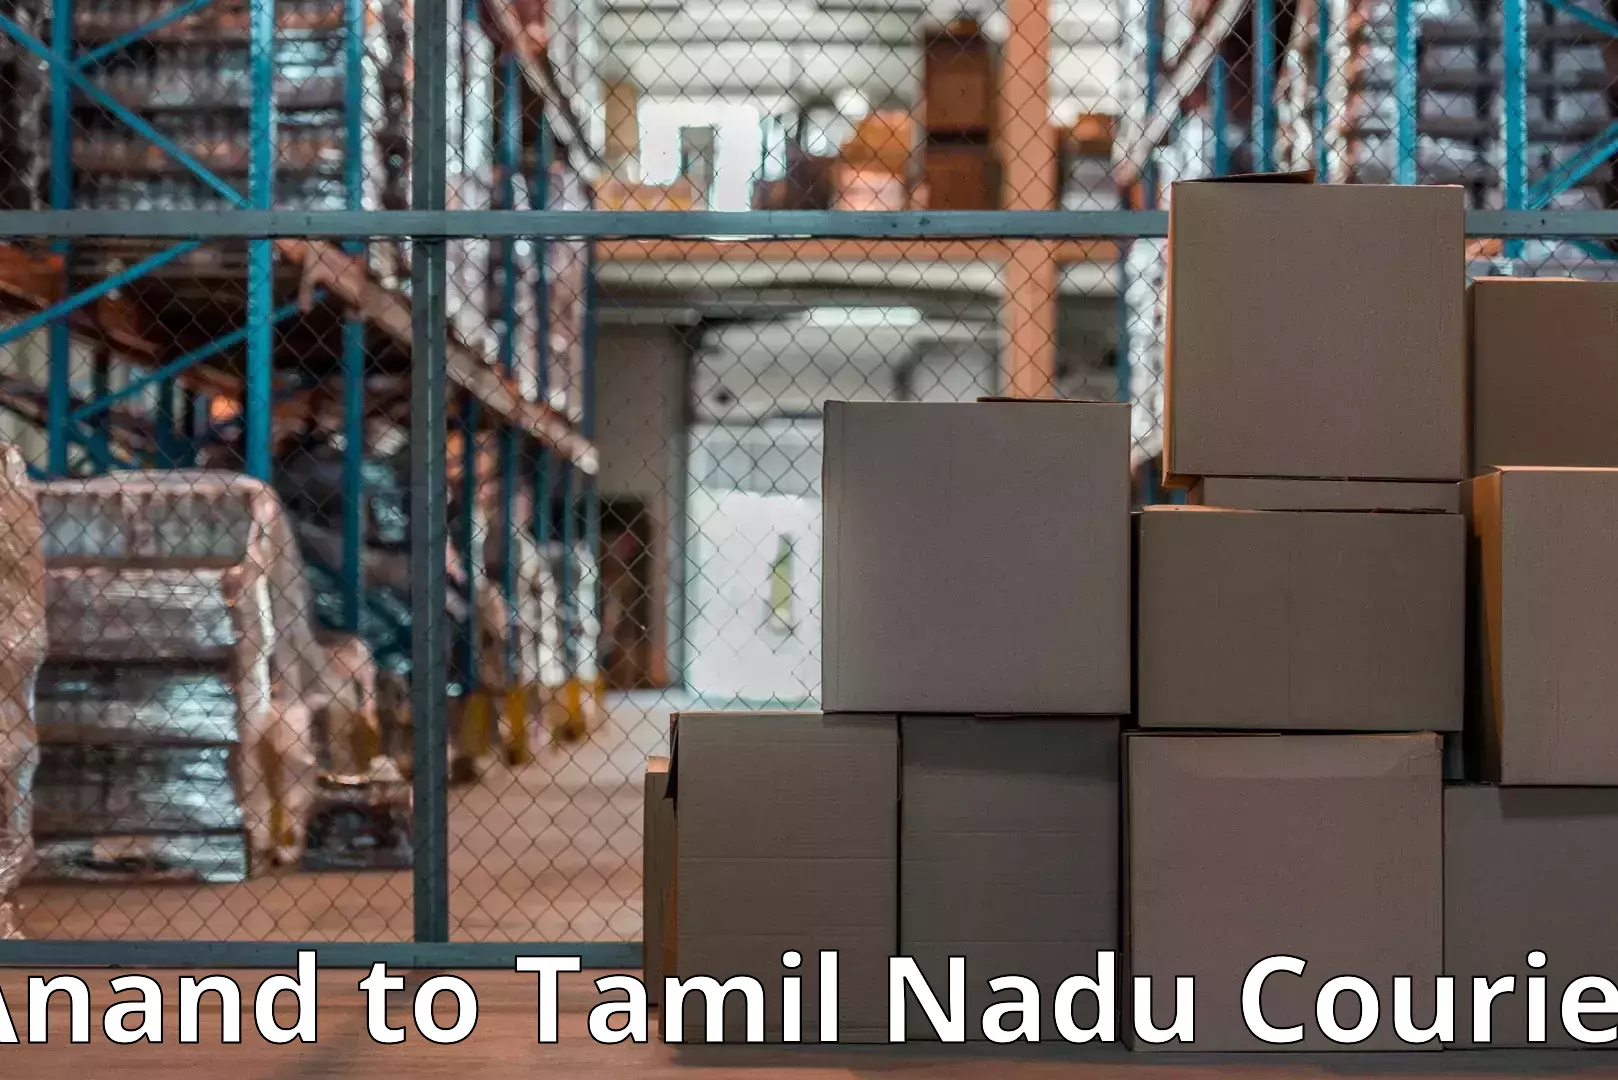 Professional moving company Anand to Tamil Nadu